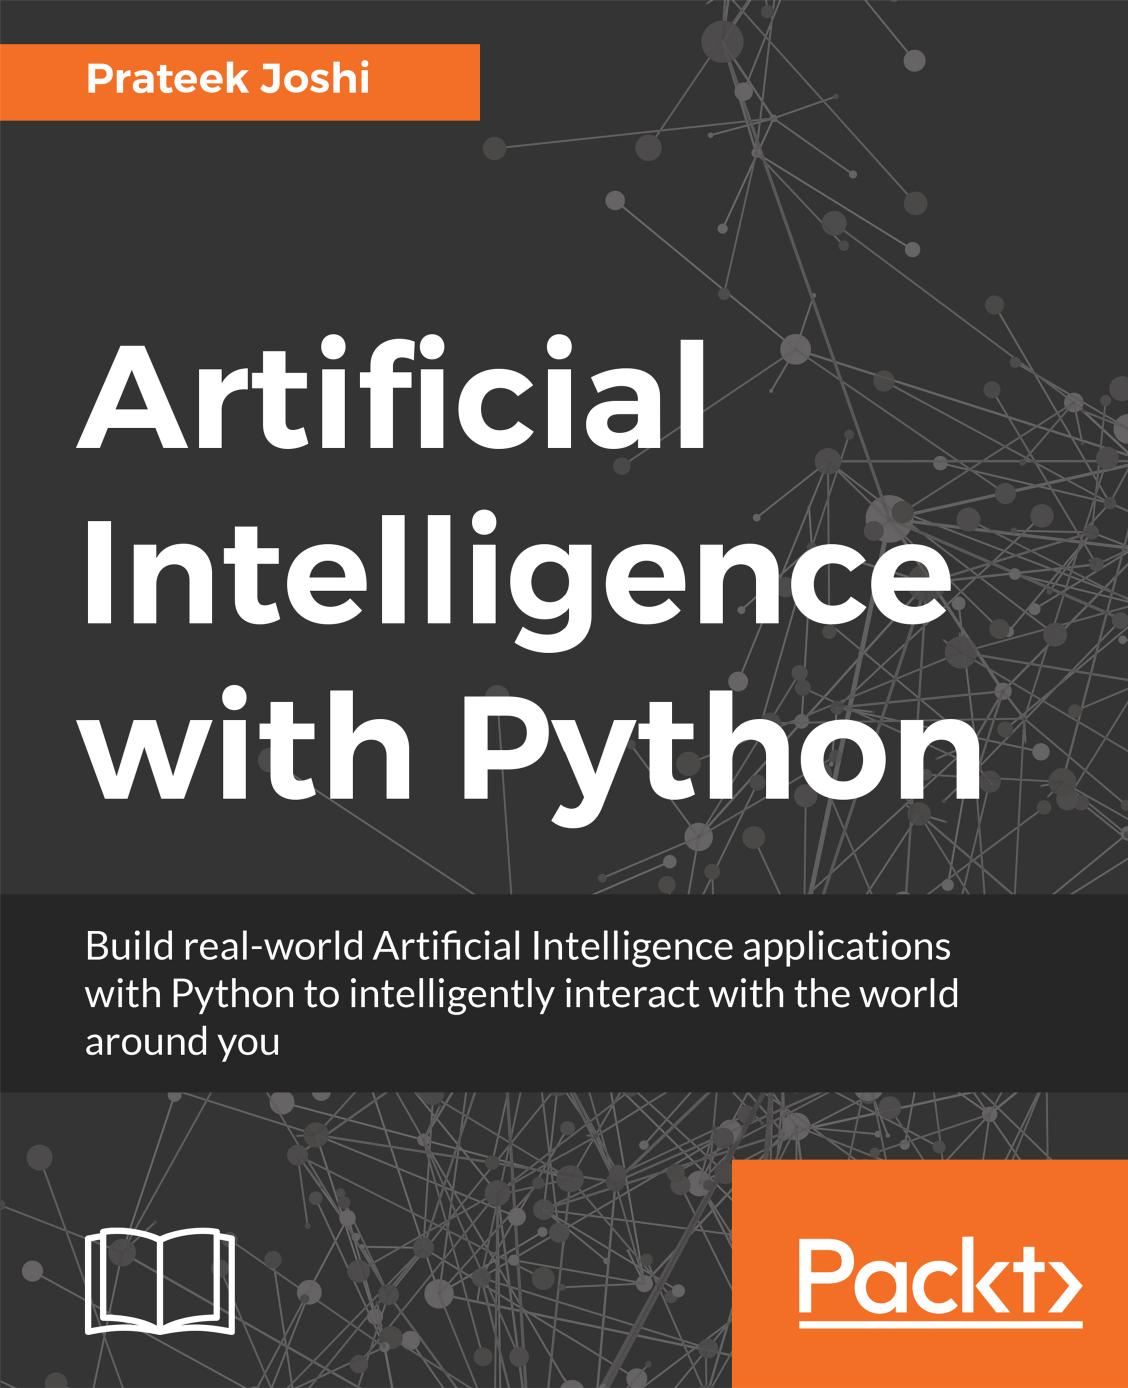 Artificial Intelligence with Python 2017 ( PDFDrive.com )